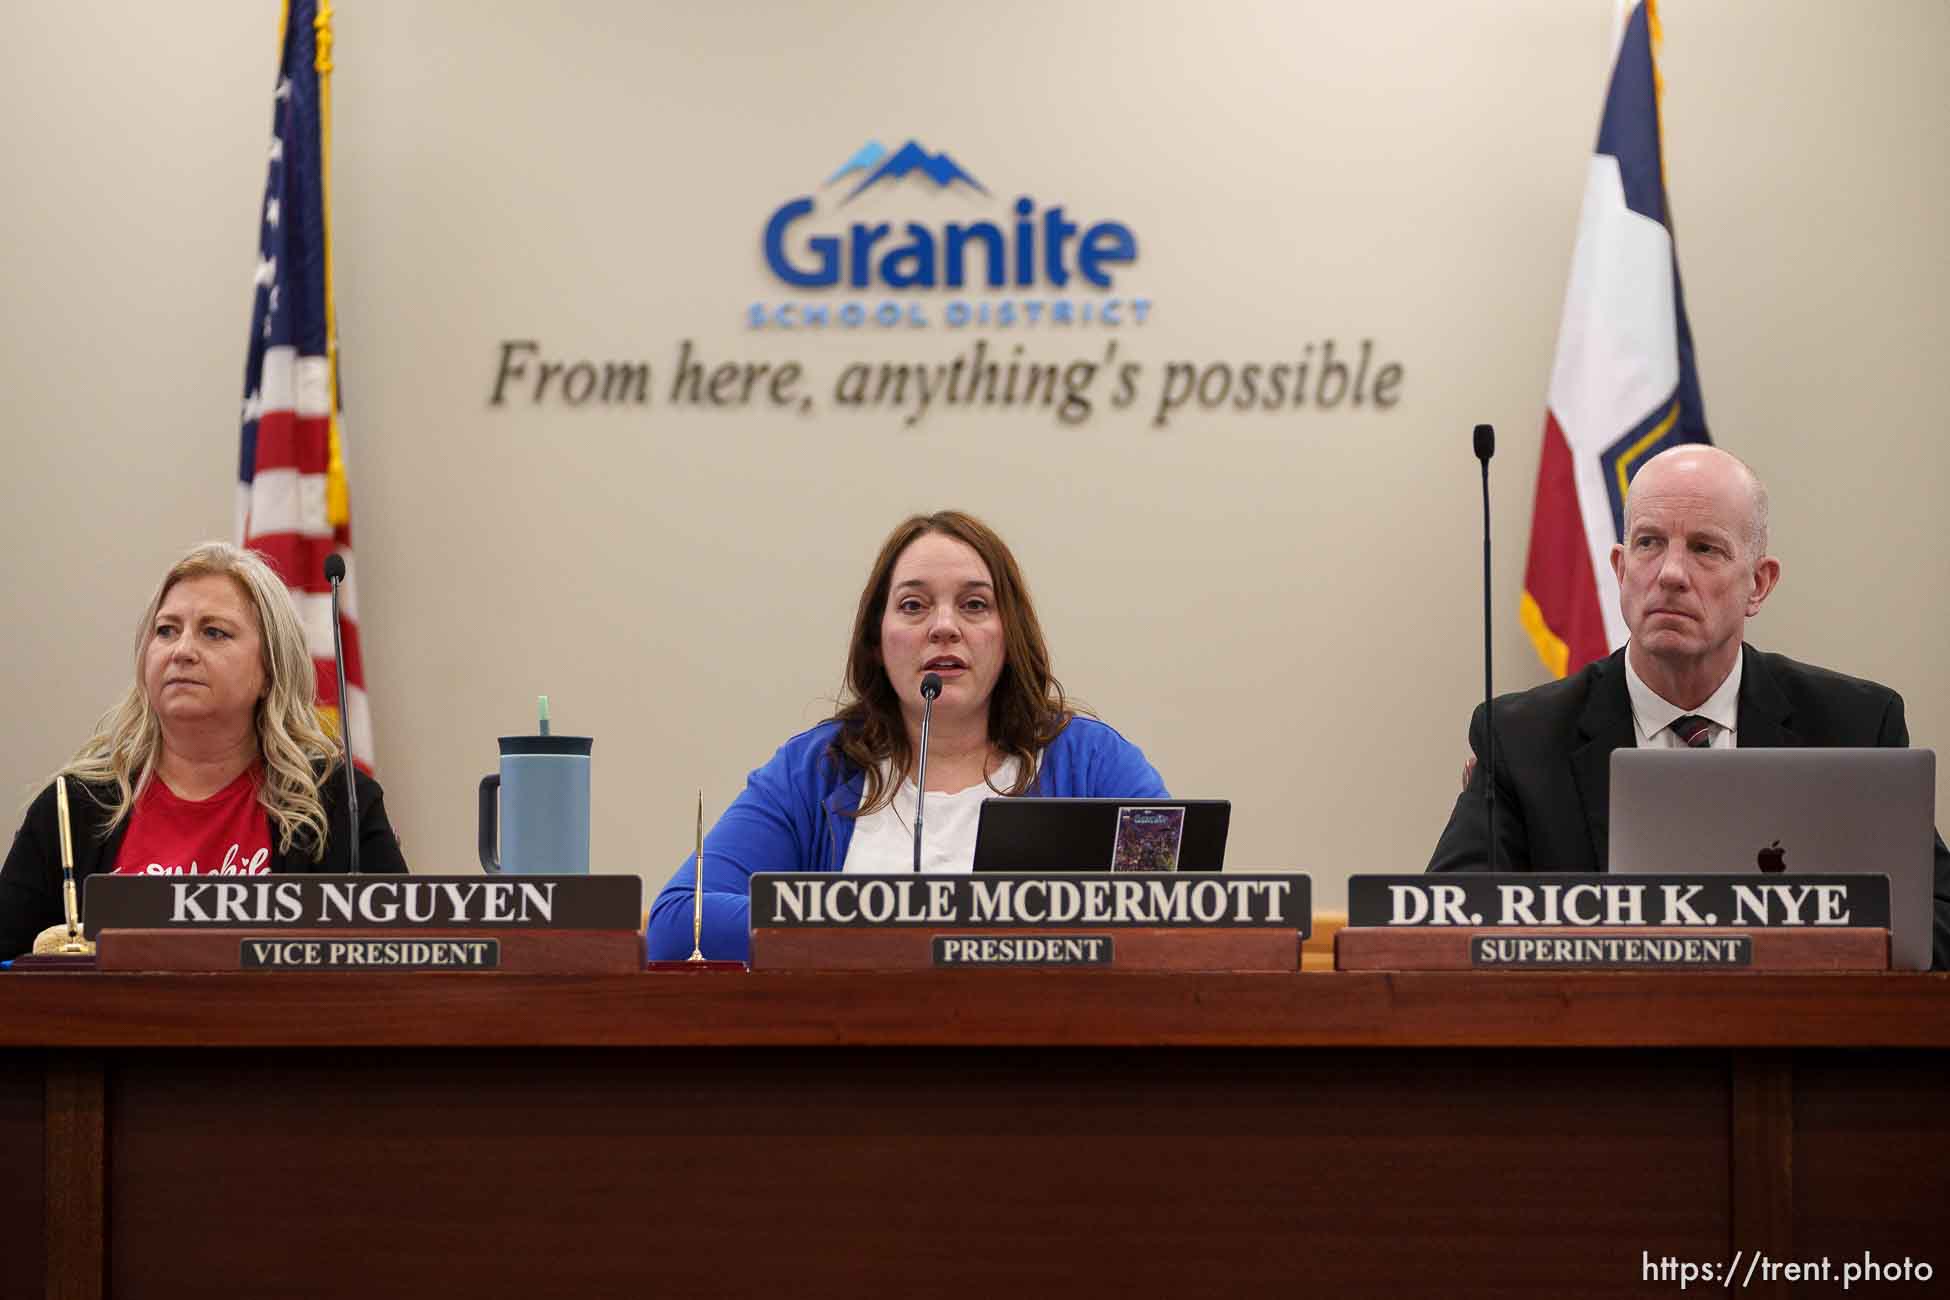 (Trent Nelson  |  The Salt Lake Tribune) The Granite School District's board passes a resolution against the actions of Natalie Cline and in support of its student athlete during a meeting in South Salt Lake on Friday, Feb. 9, 2024. From left are Kris Nguyen, Nicole McDermott and Rich Nye.